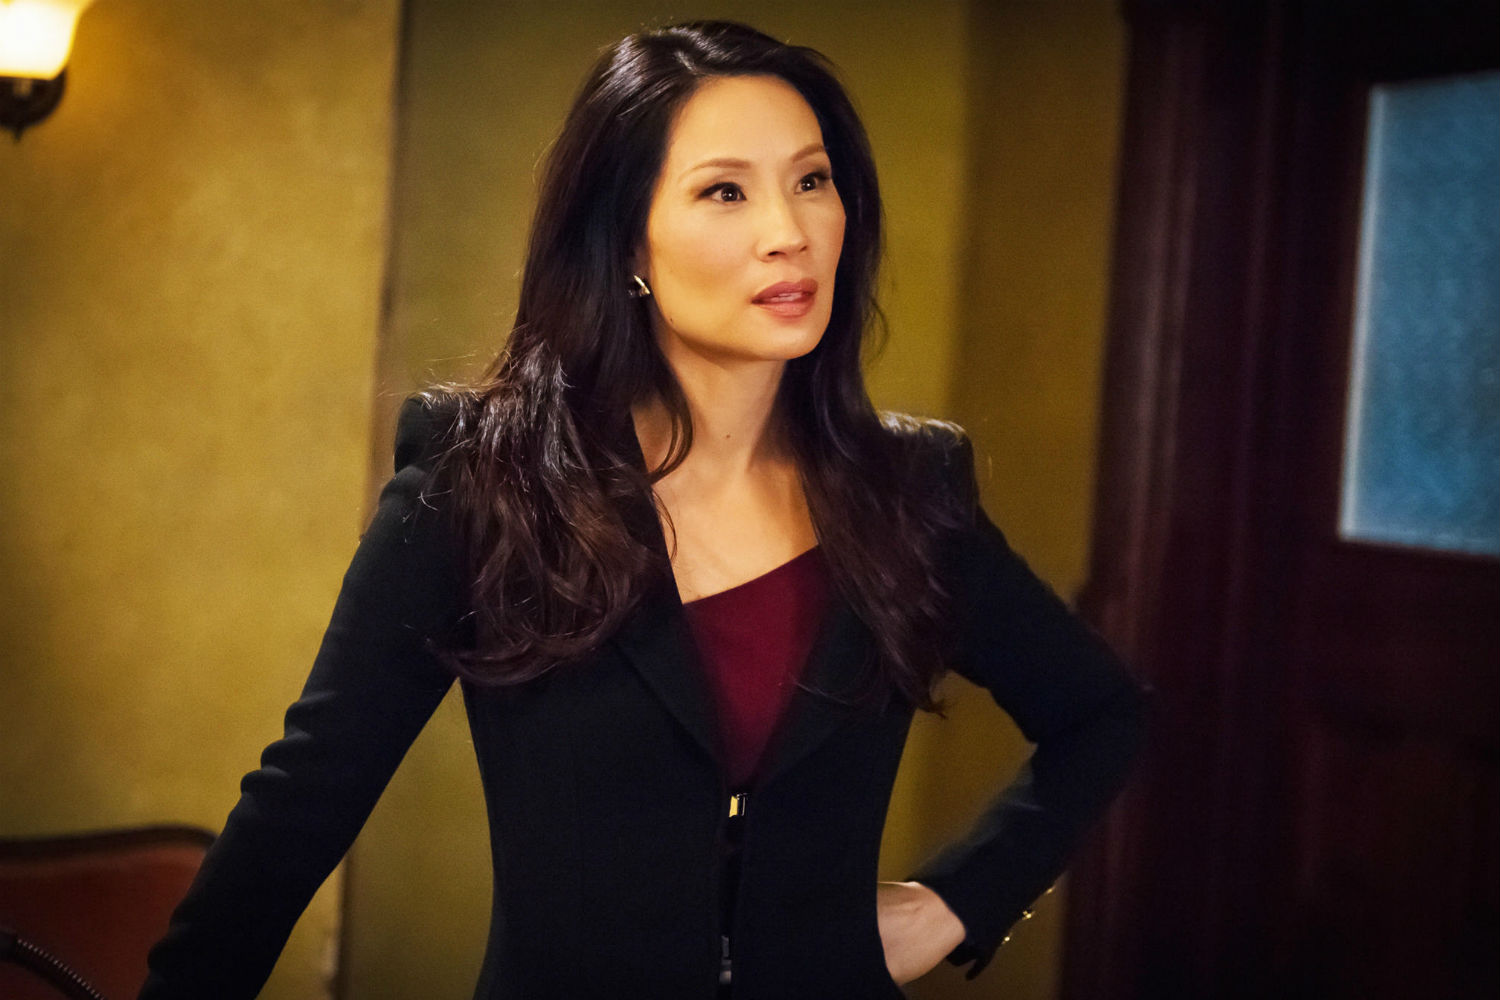 Lucy Liu Fisting Squirting - Lucy Liu Will Direct the 'Luke Cage' Season 2 Premiere | Digital Trends